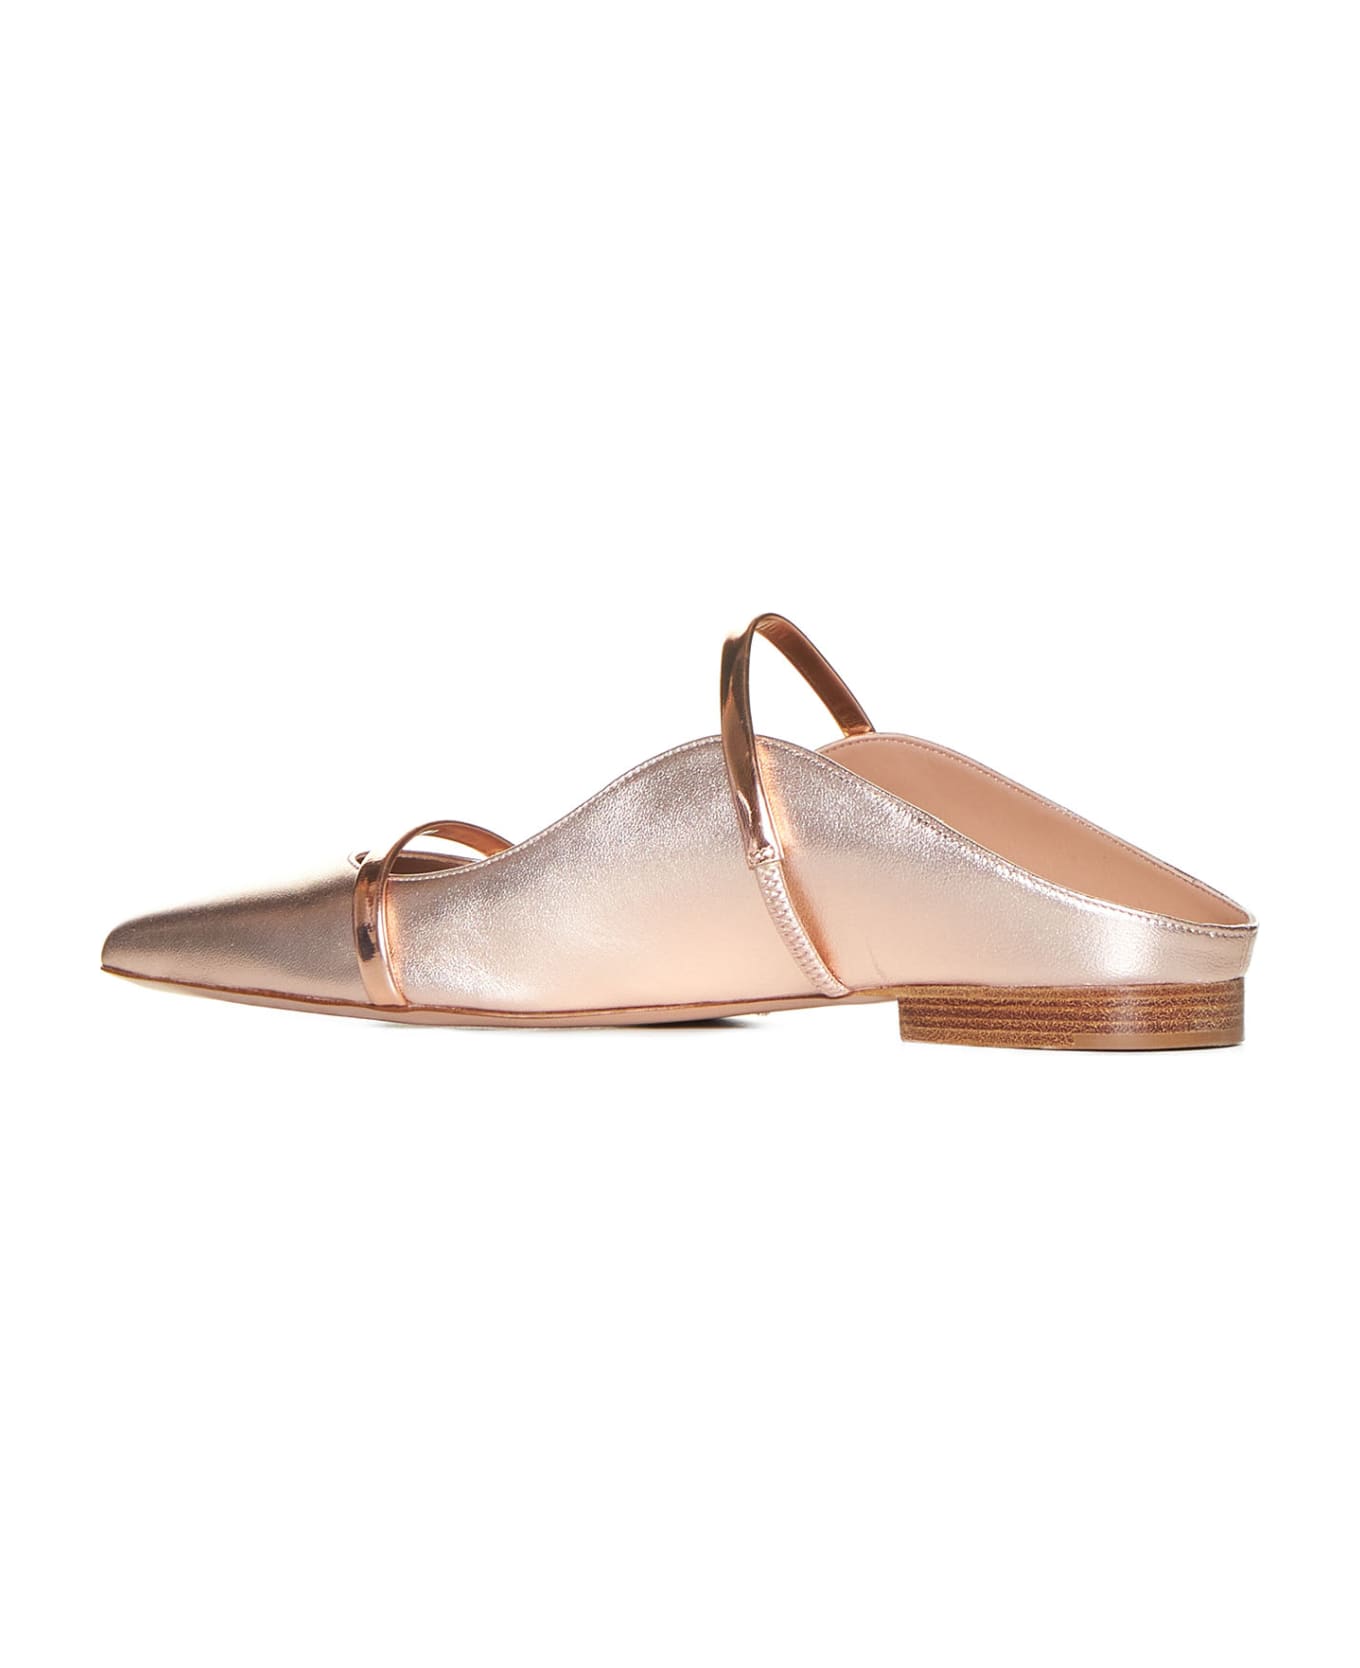 Malone Souliers Sandals - Rose gold